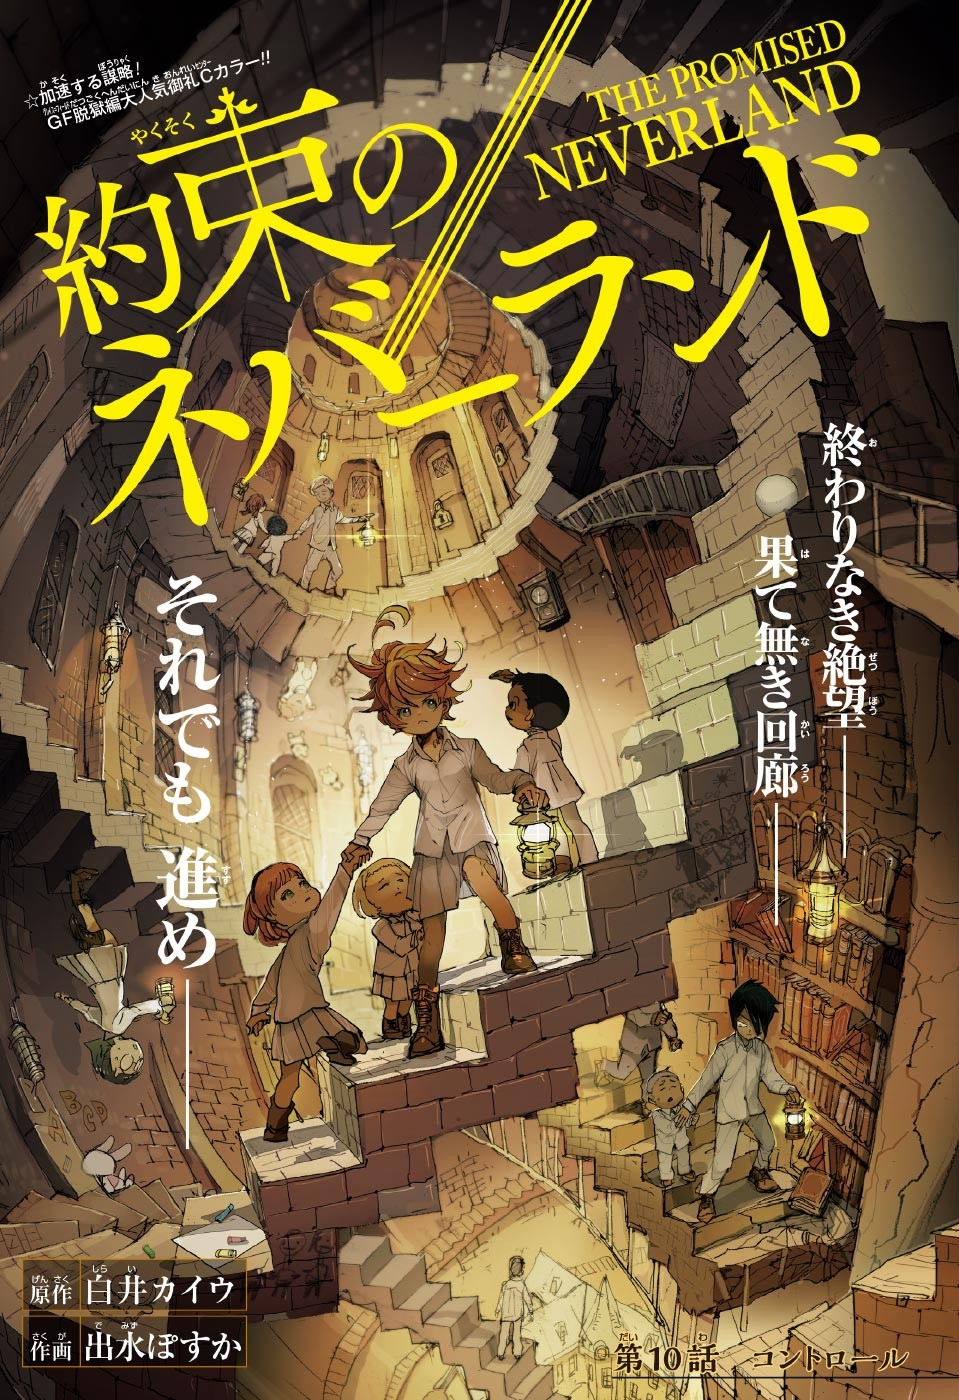 JUST IN: “The Promised Neverland” Season 2 has received a new